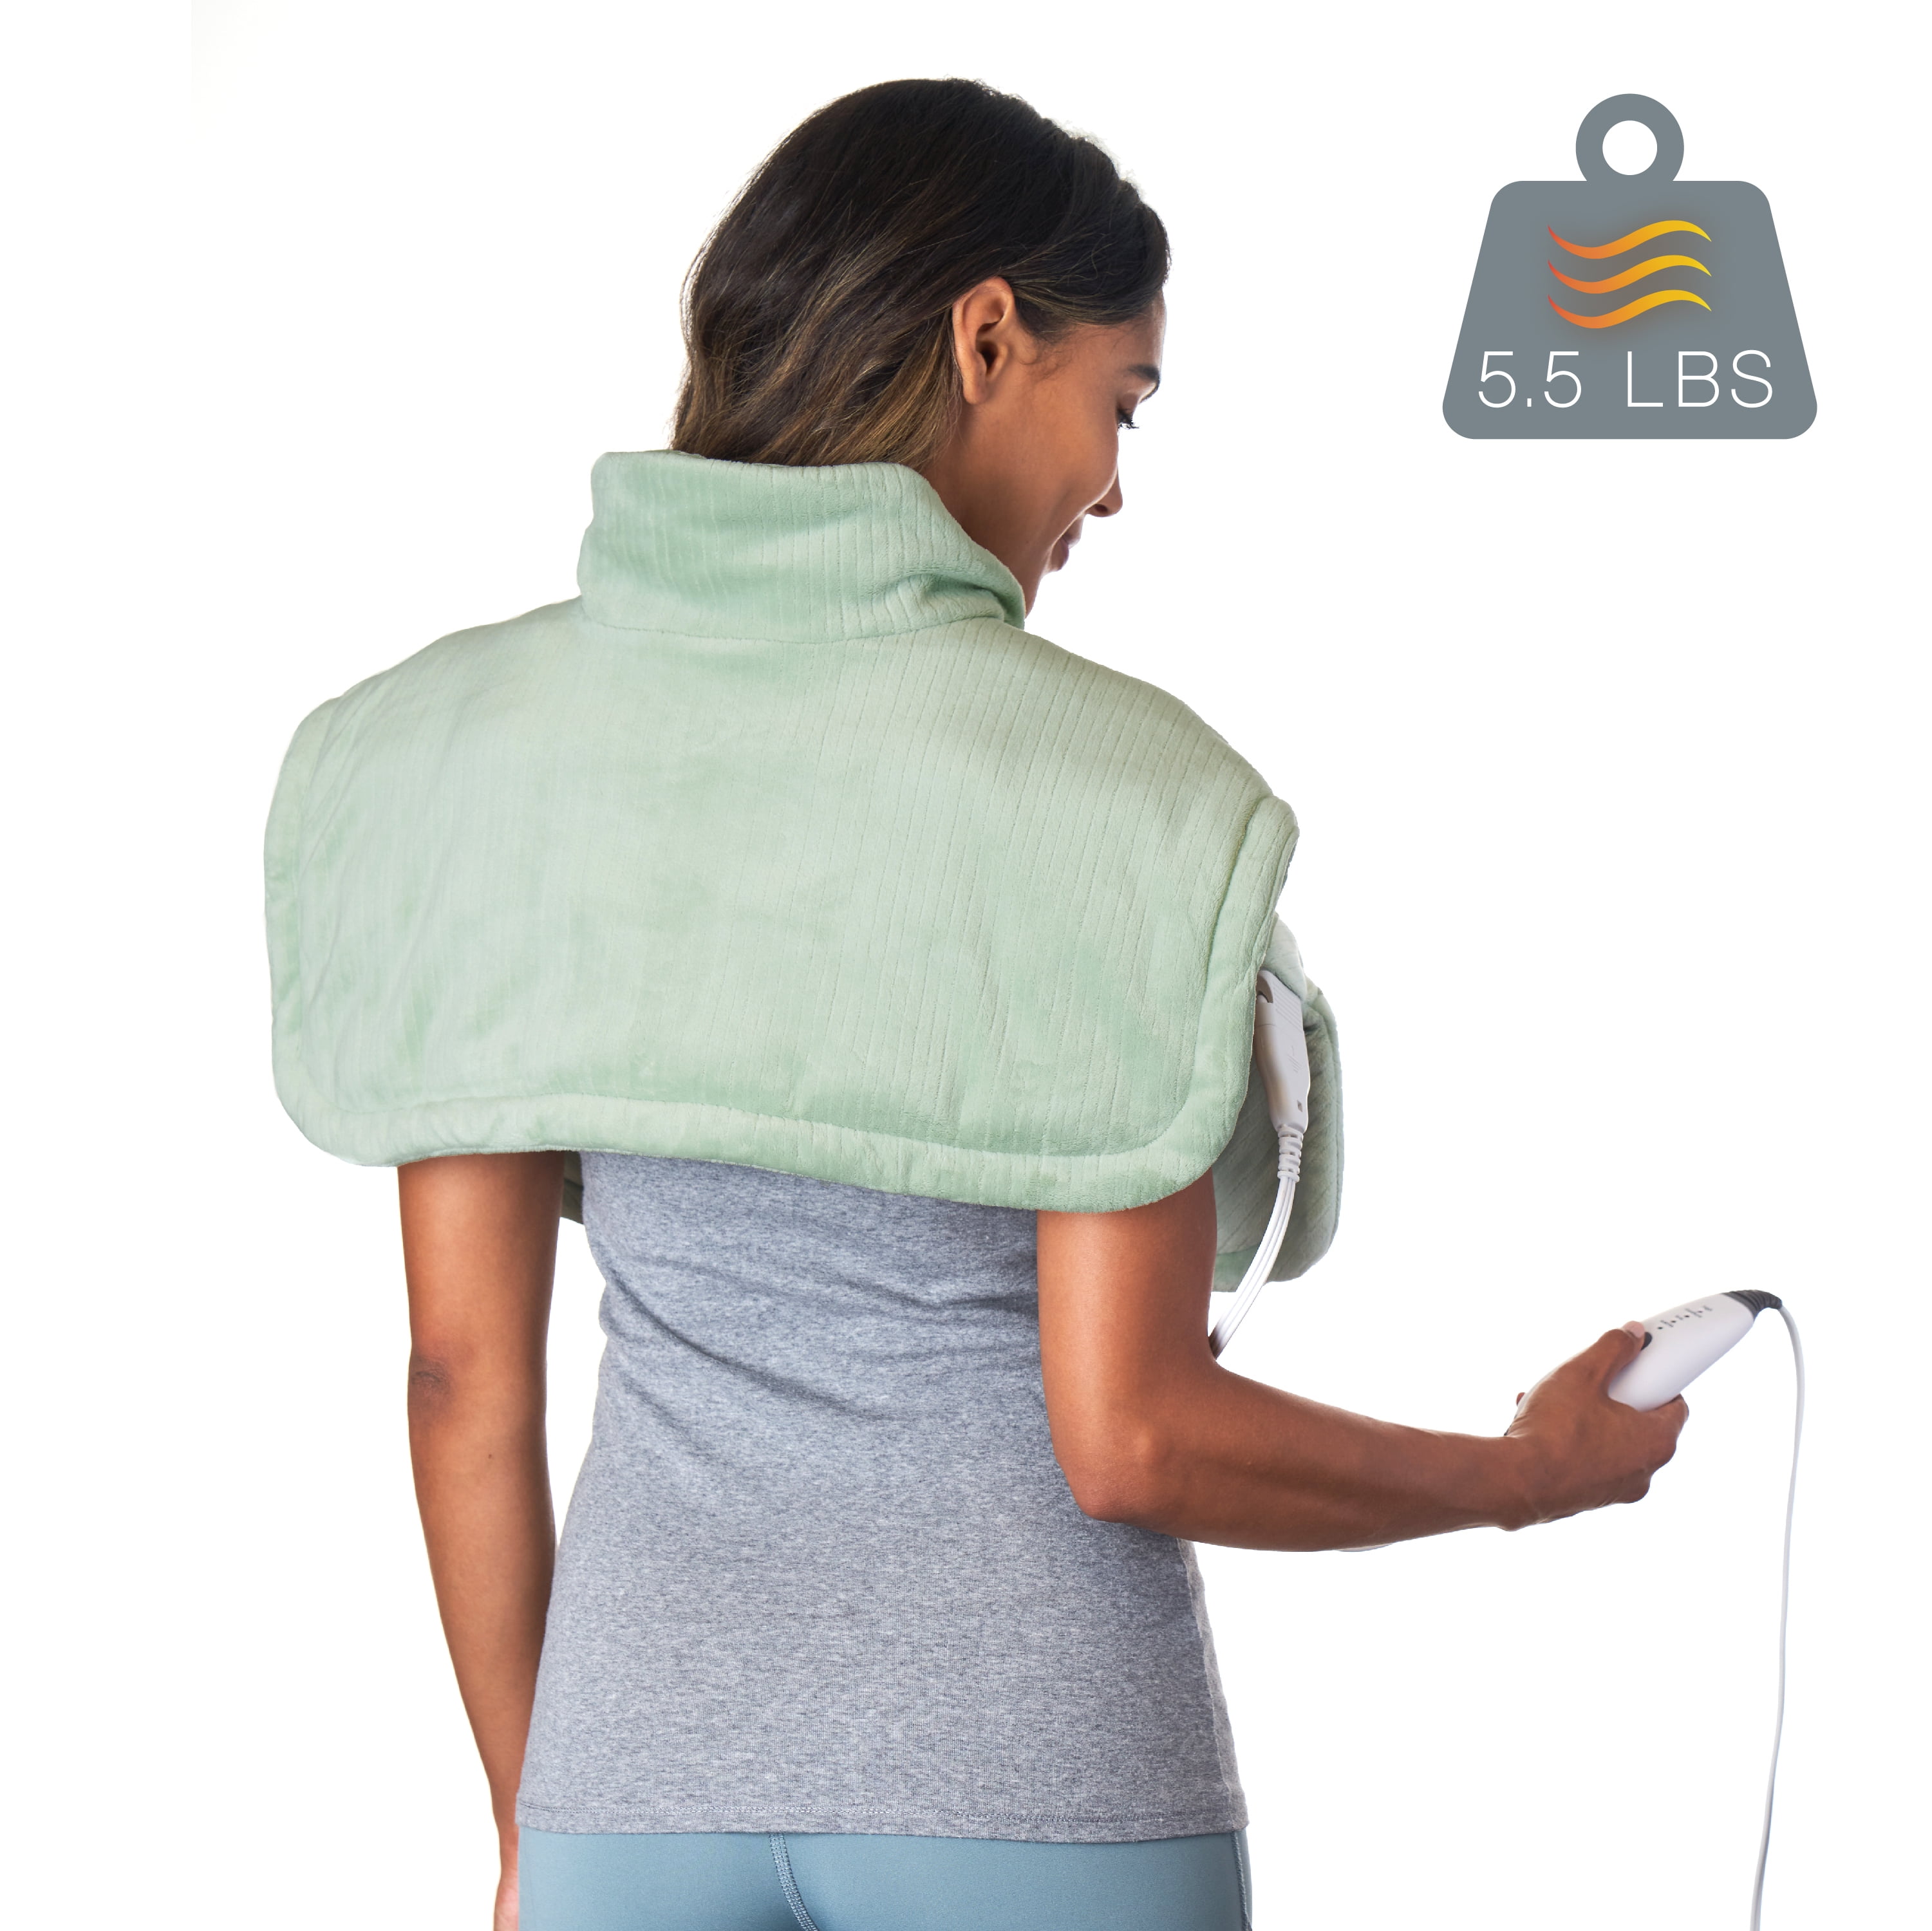 Pure Enrichment WeightedWarmth 3-in-1 Back & Neck Heating Pad - 3 Heat  Settings 3 Massage Speeds & 2.6 lbs of Weighted Pressure - 32 x 24 with  Plush Fabric & Dry/Moist Heat for Back Pain